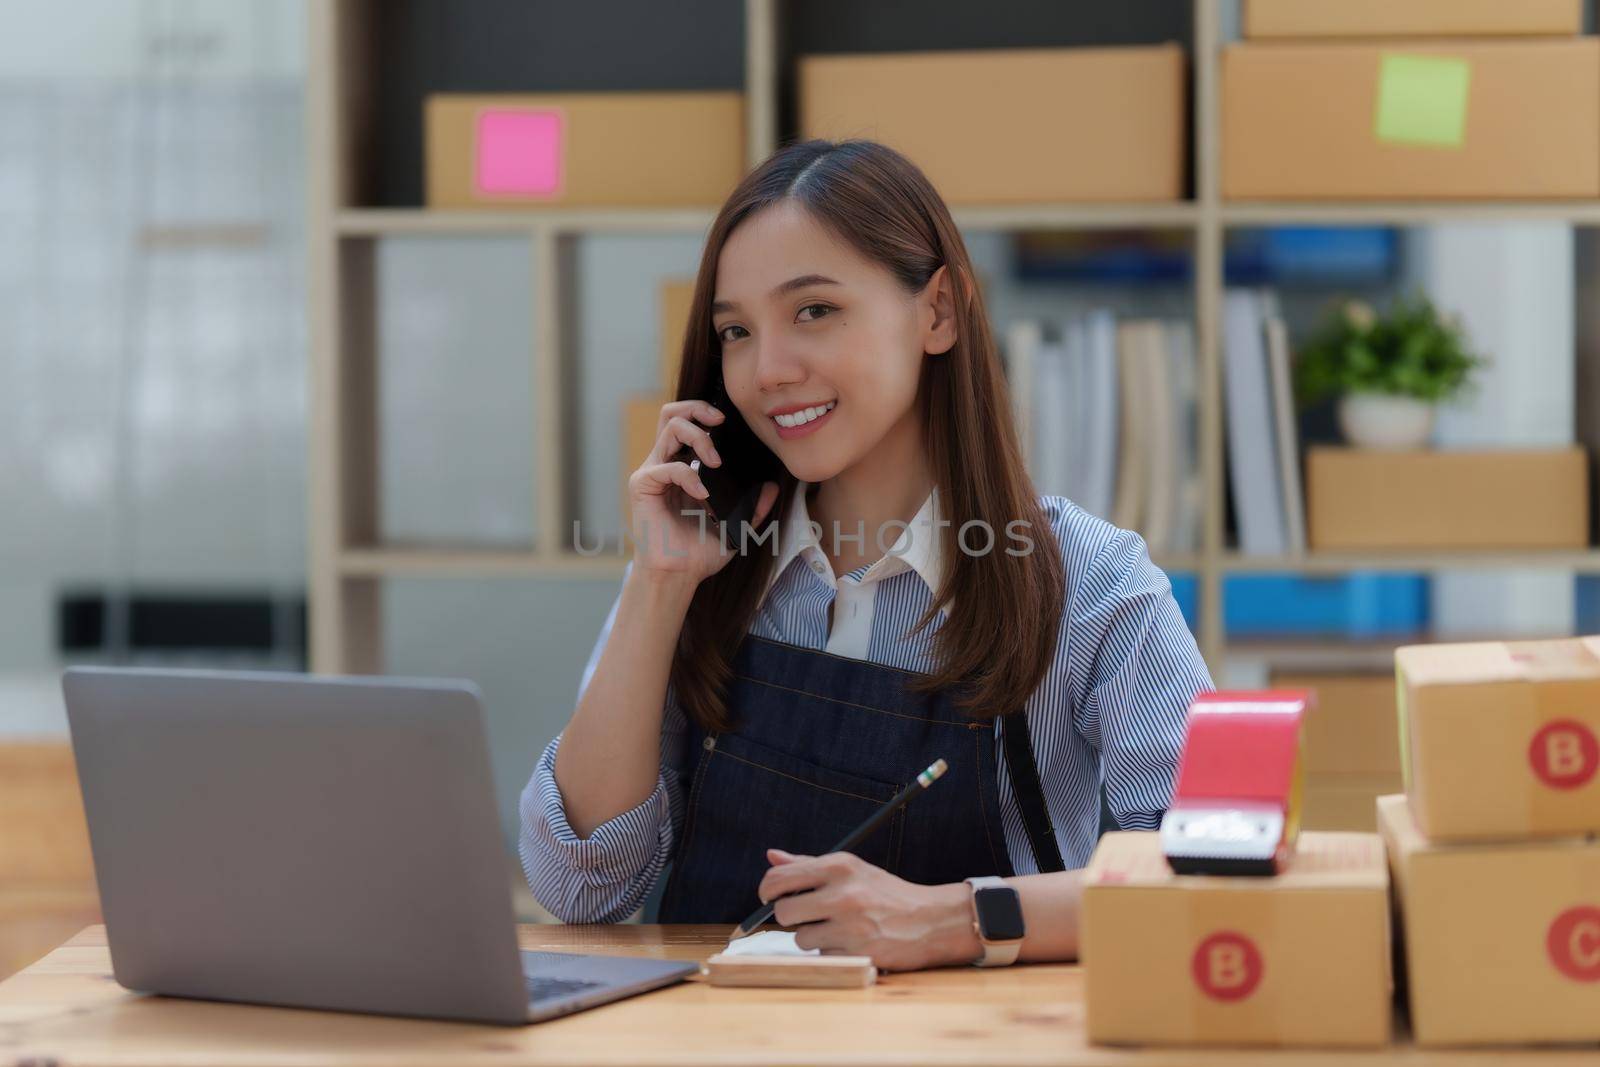 Asian small business owner working at home office. Business retail market and online sell marketing delivery, SME e-commerce concept by itchaznong